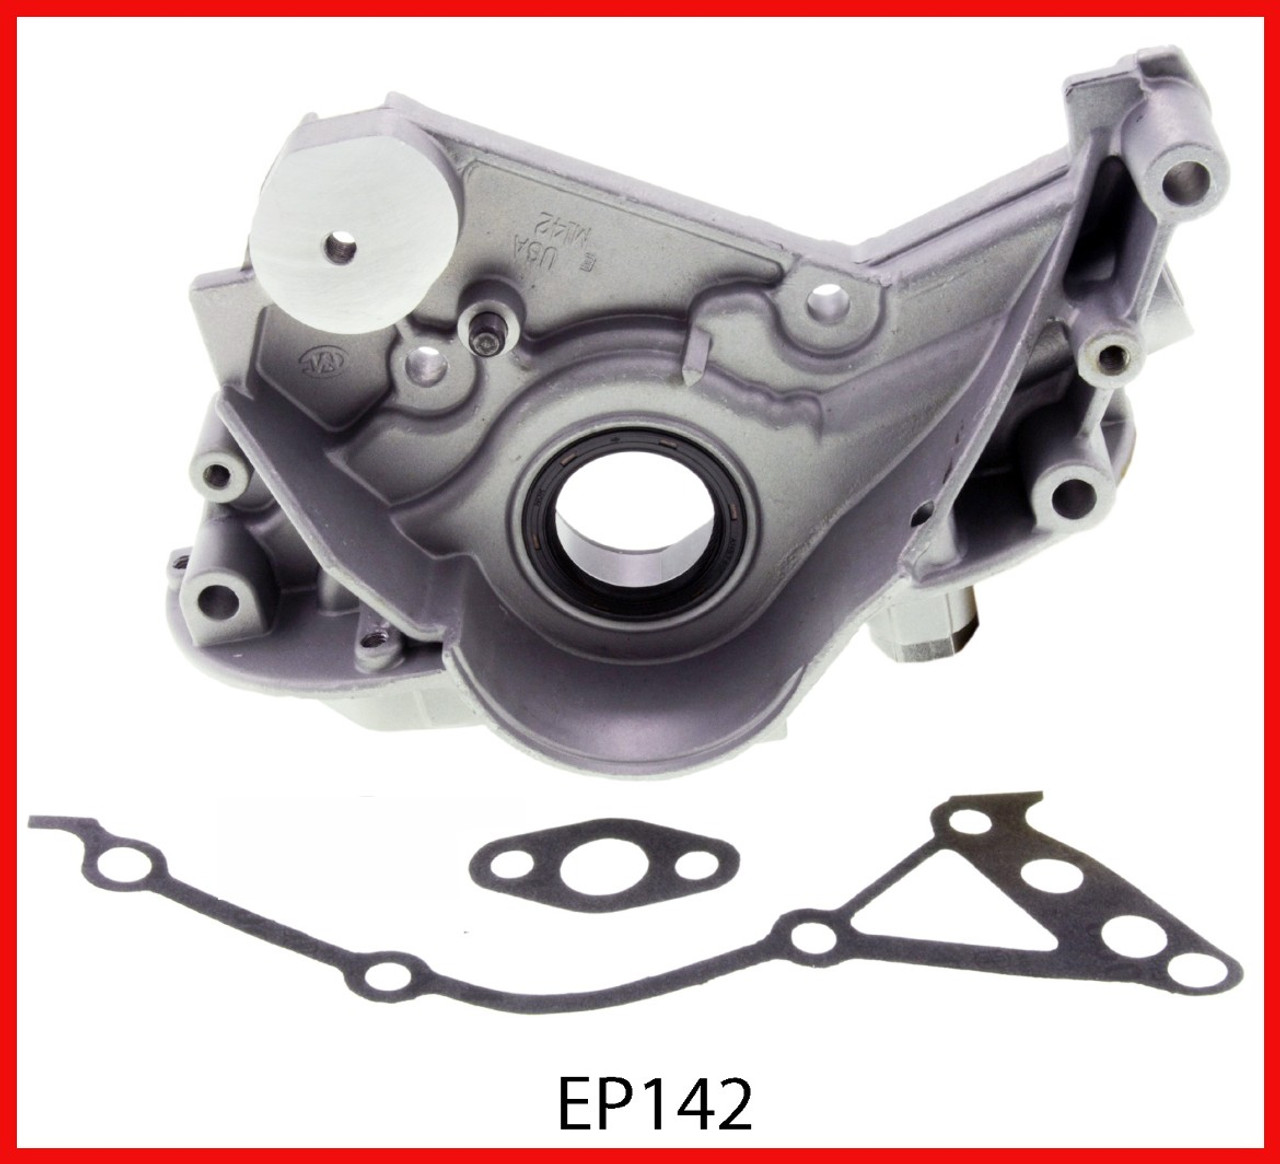 Oil Pump - 1988 Plymouth Grand Voyager 3.0L (EP142.B11)